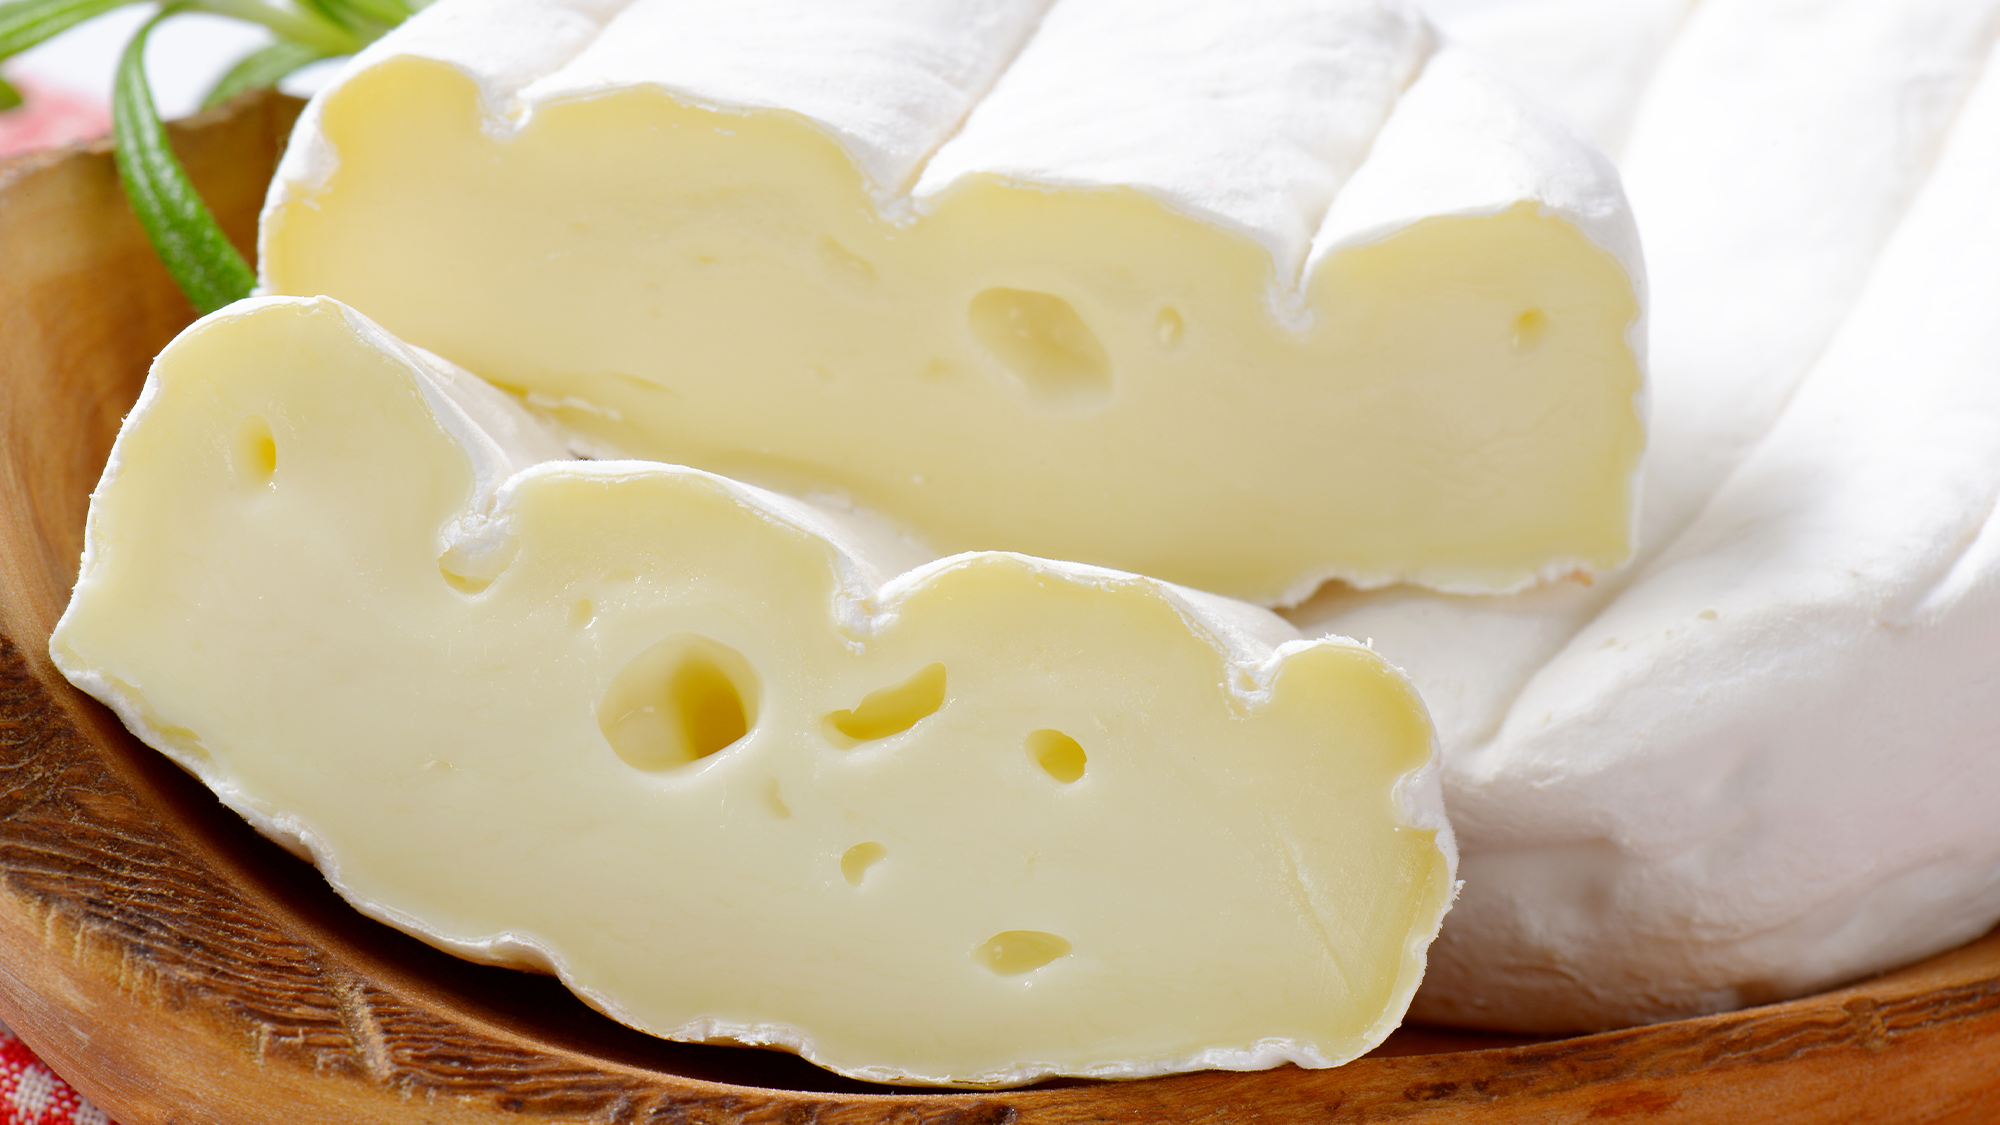 A hunk of cheese is a perfect playground for fungal antibiotics